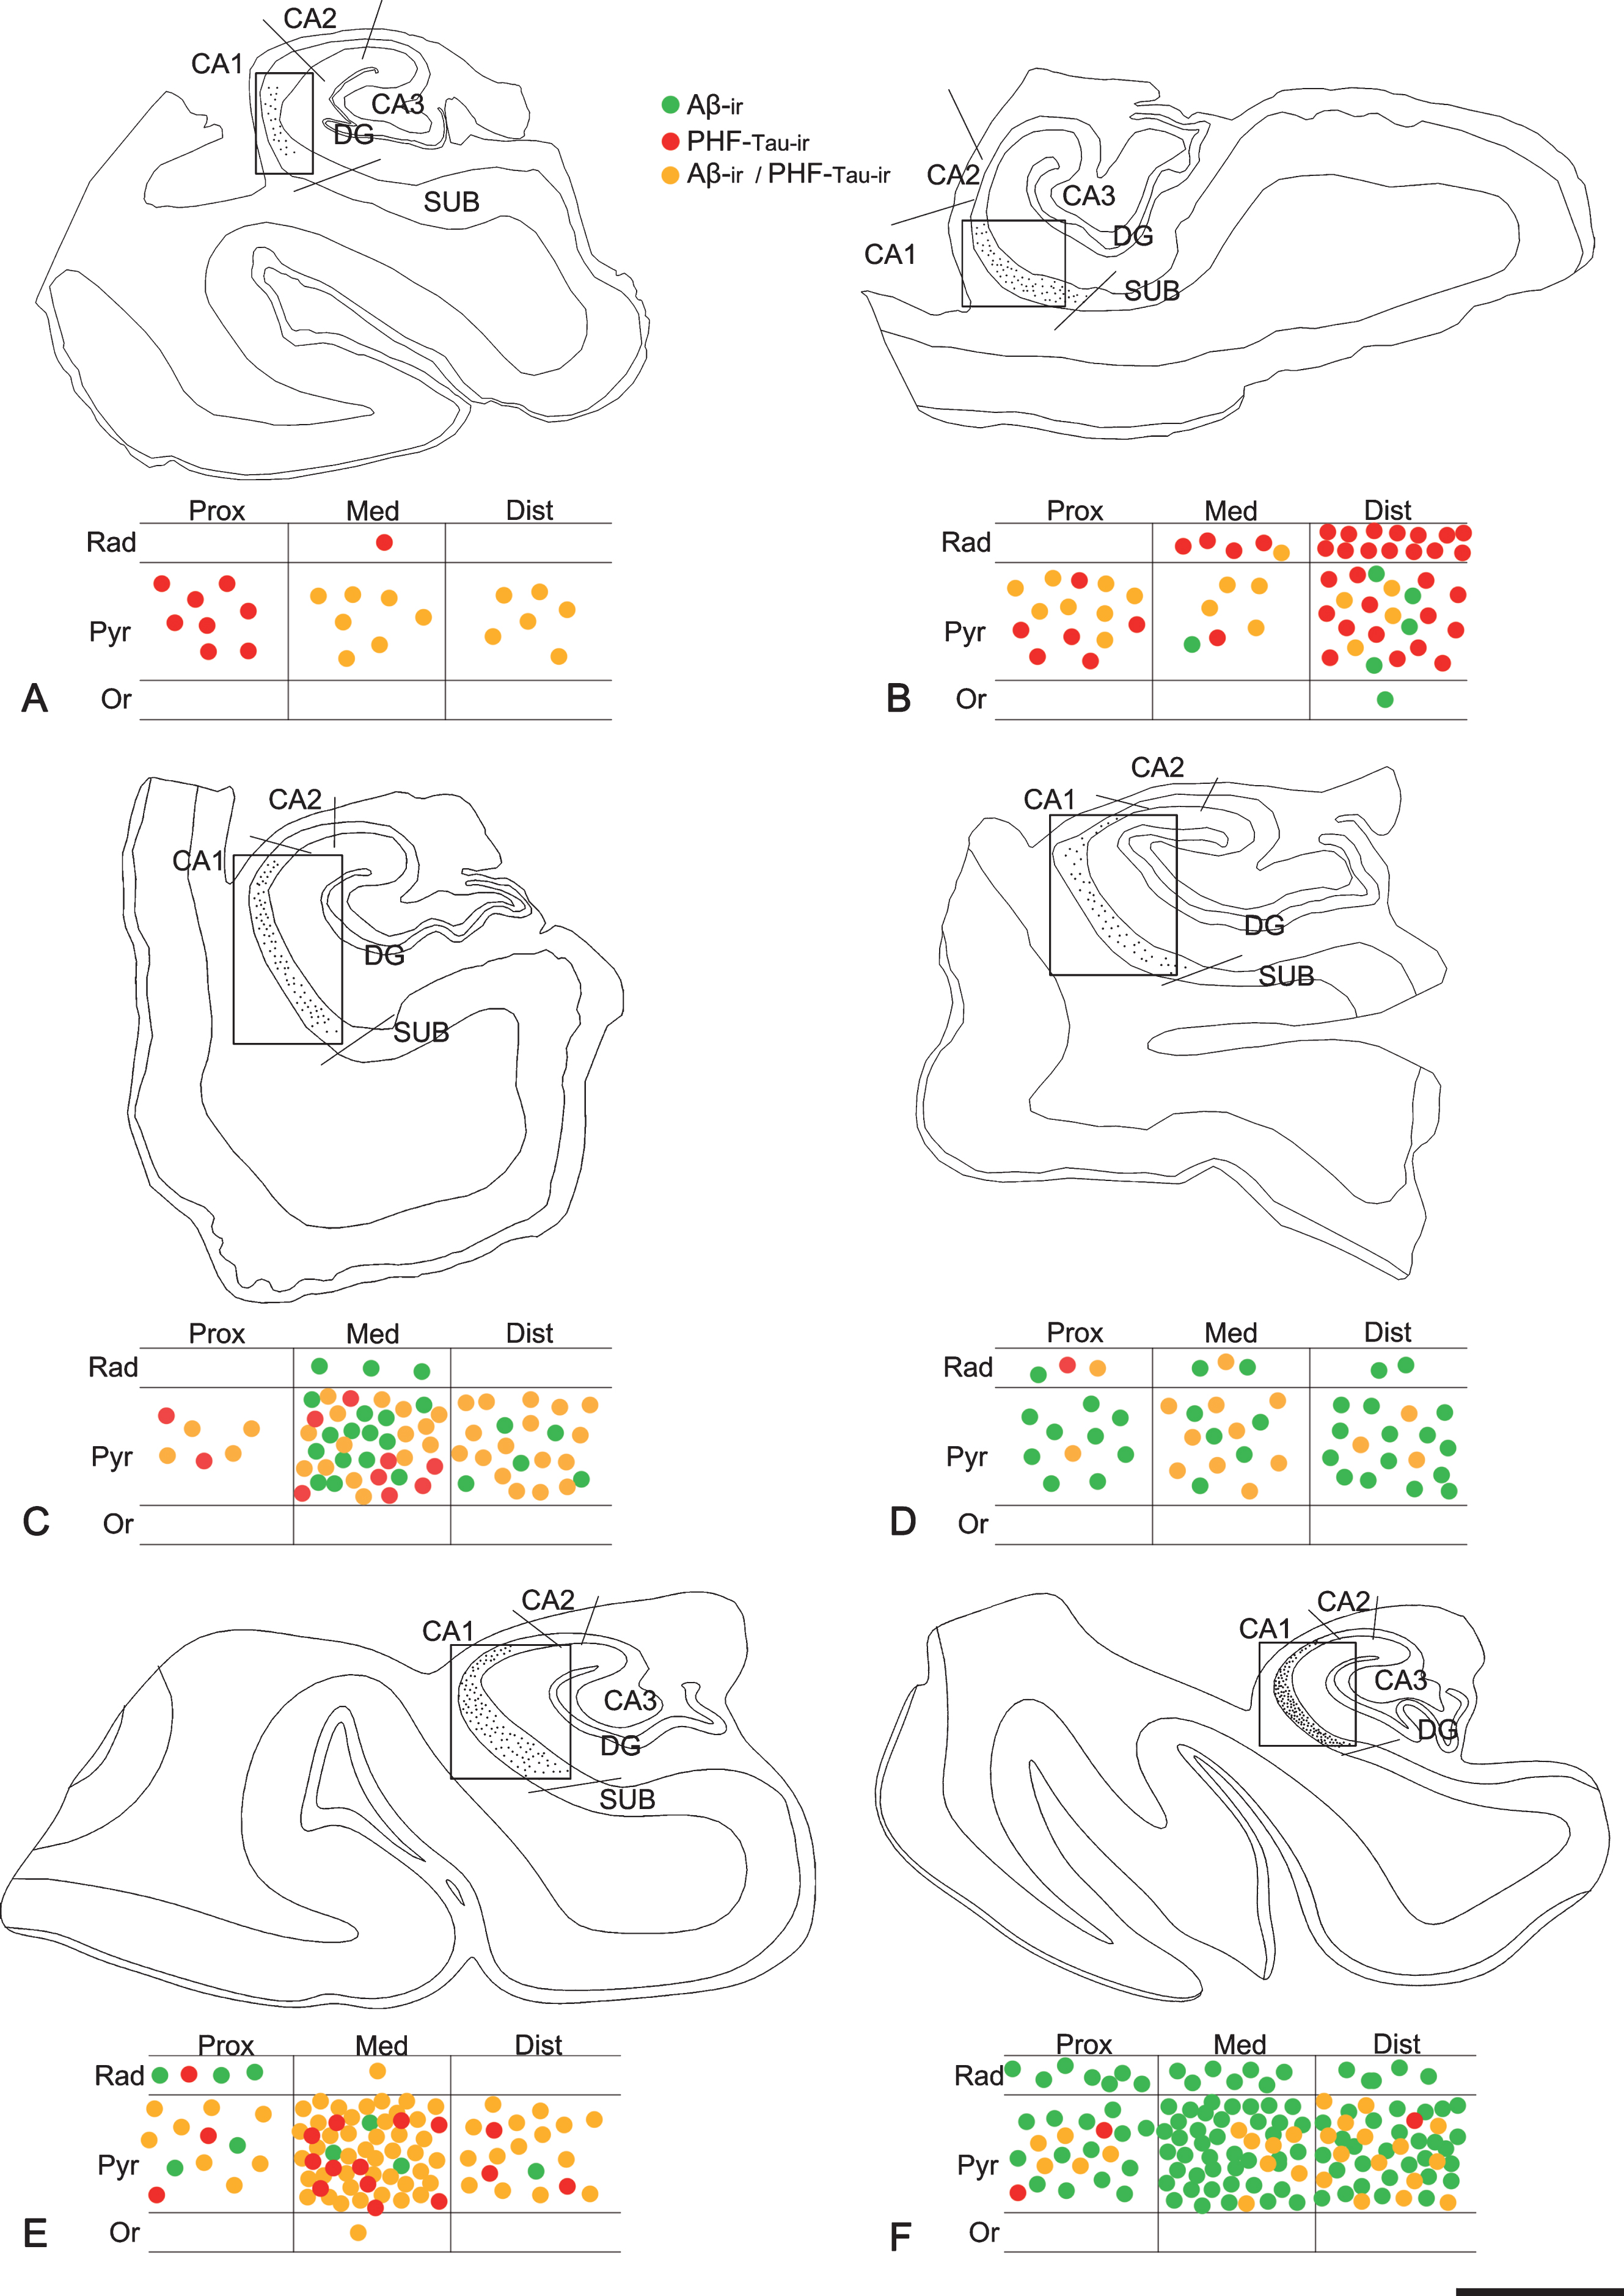 Maps of the hippocampal formation from AD patients to illustrate plaque distribution and staining patterns in CA1. Plots are based on the analysis of double-immunostained sections for anti-Aβ and anti-PHF-Tau antibodies. Borders between hippocampal fields are indicated by lines. CA1 is marked with a rectangle. Below each section profile, CA1 is shown schematically with its corresponding subregions and layers. Green dots correspond to Aβ-ir plaques, red dots to PHF-Tau-ir plaques (either PHFpS396 or PHFAT8), and yellow dots indicate plaques expressing both Aβ and PHF-Tau proteins. A–F) Representative drawings from patients Az1, Az2, Az3, Az4, Az5 and Az6, respectively. DG, dentate gyrus; CA1–CA3, cornu ammonis fields; SUB, subiculum; Prox, proximal; Med, medial; Dist, distal; Or, stratum oriens; Pyr, stratum pyramidale; Rad, stratum radiatum. Scale bar (in F): 2000μm.